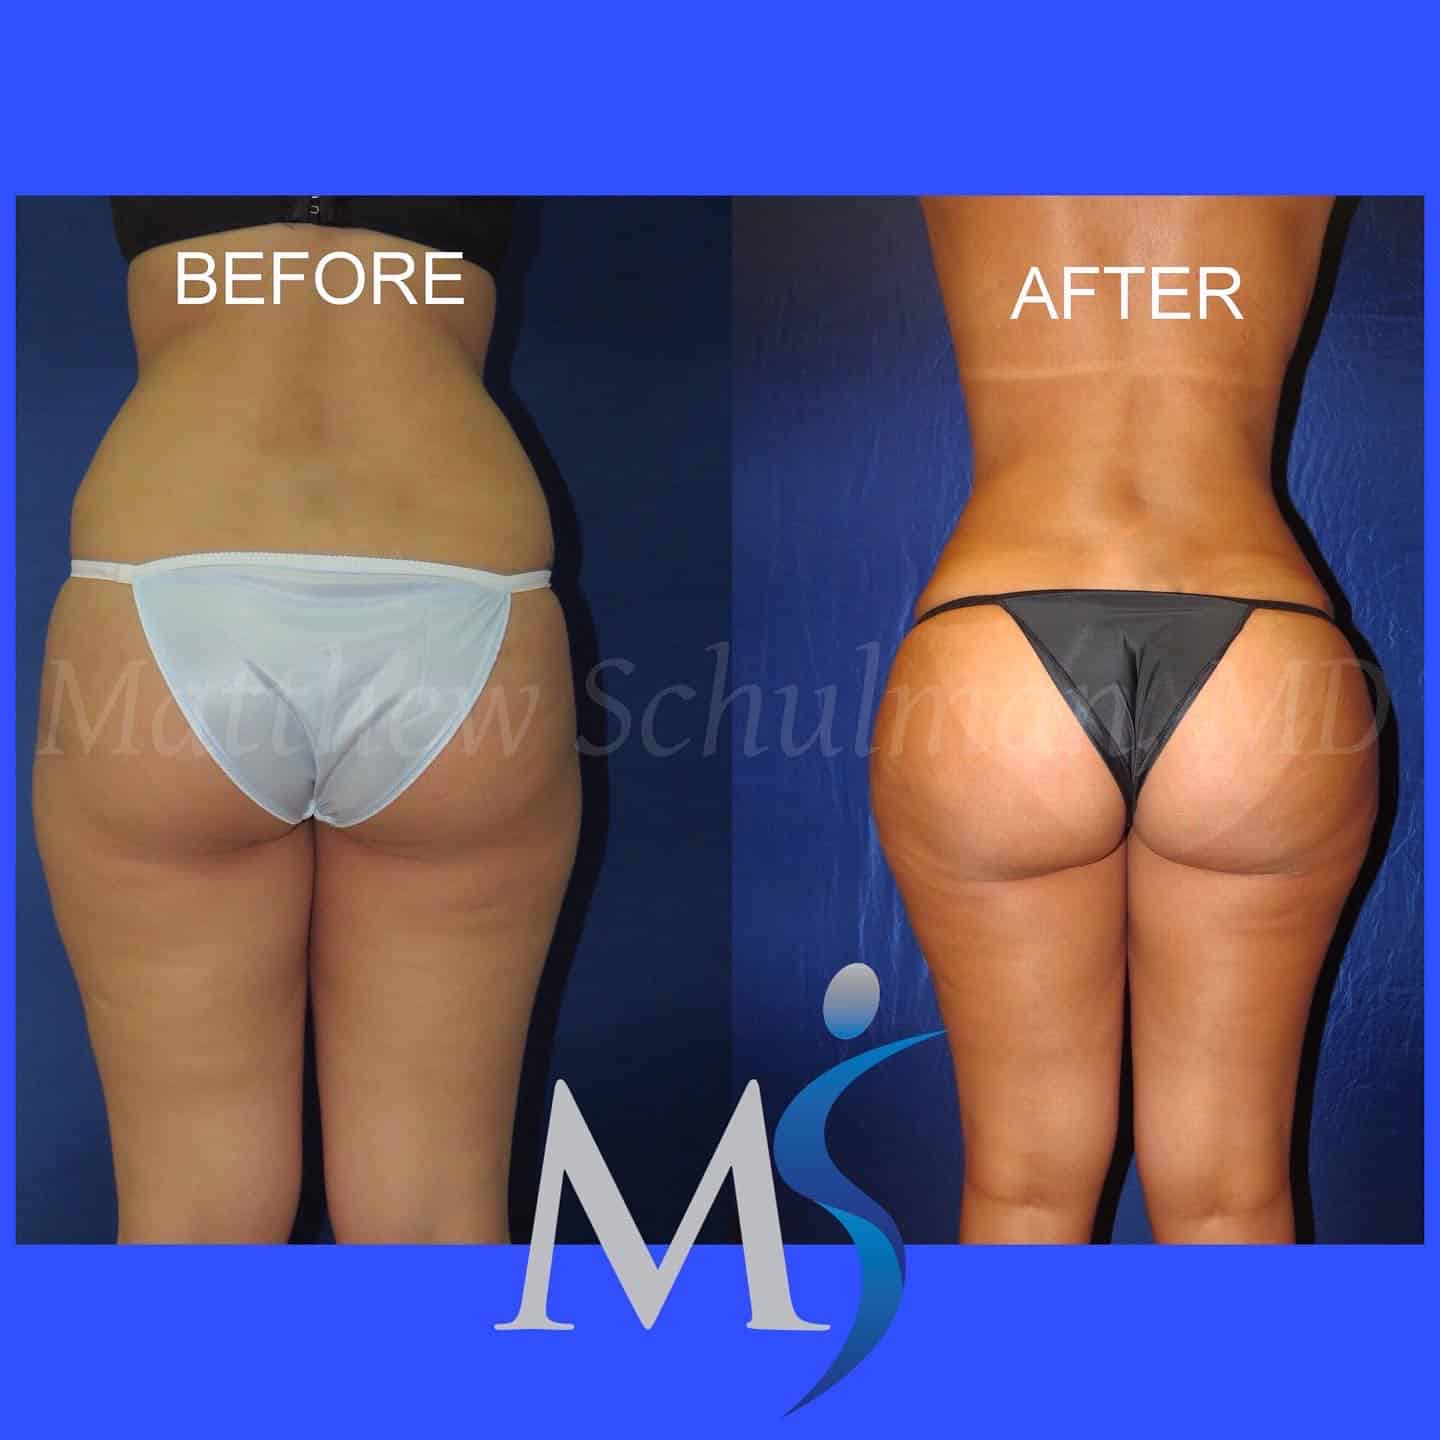 Lipo 360 - Cosmetic Surgery Results with Artistry and Safety